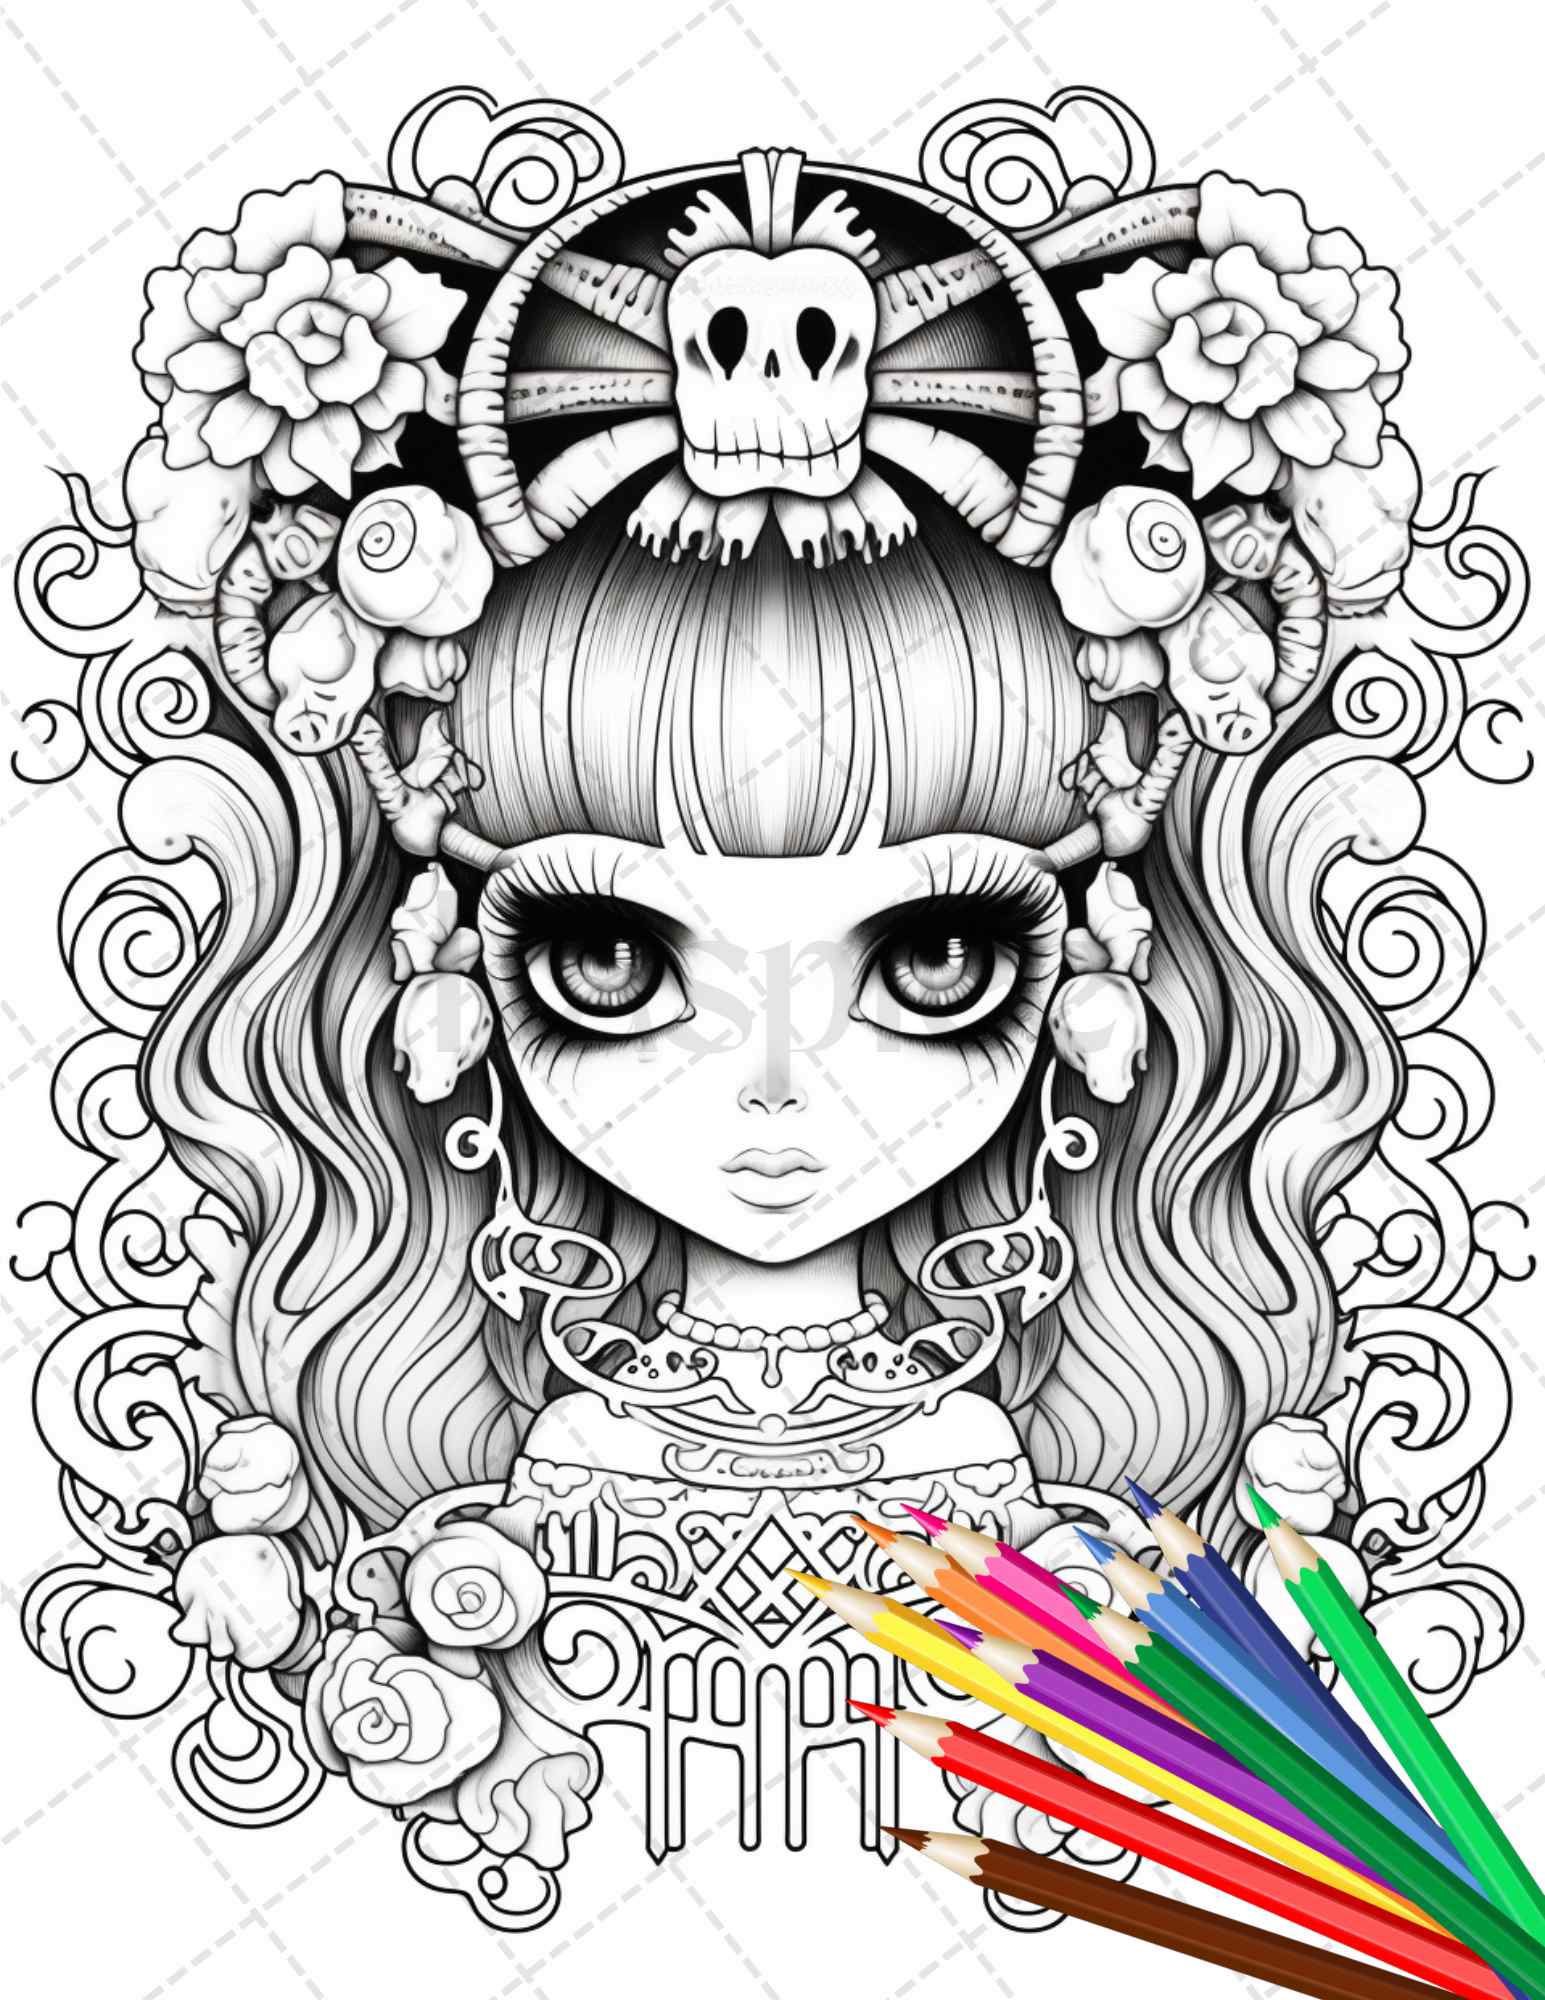 Pop Manga Adult Coloring Book: Cute and Creepy Drawings for Adults Perfect  gift for Anime Lovers, Goths, Teens & Girls (Paperback)